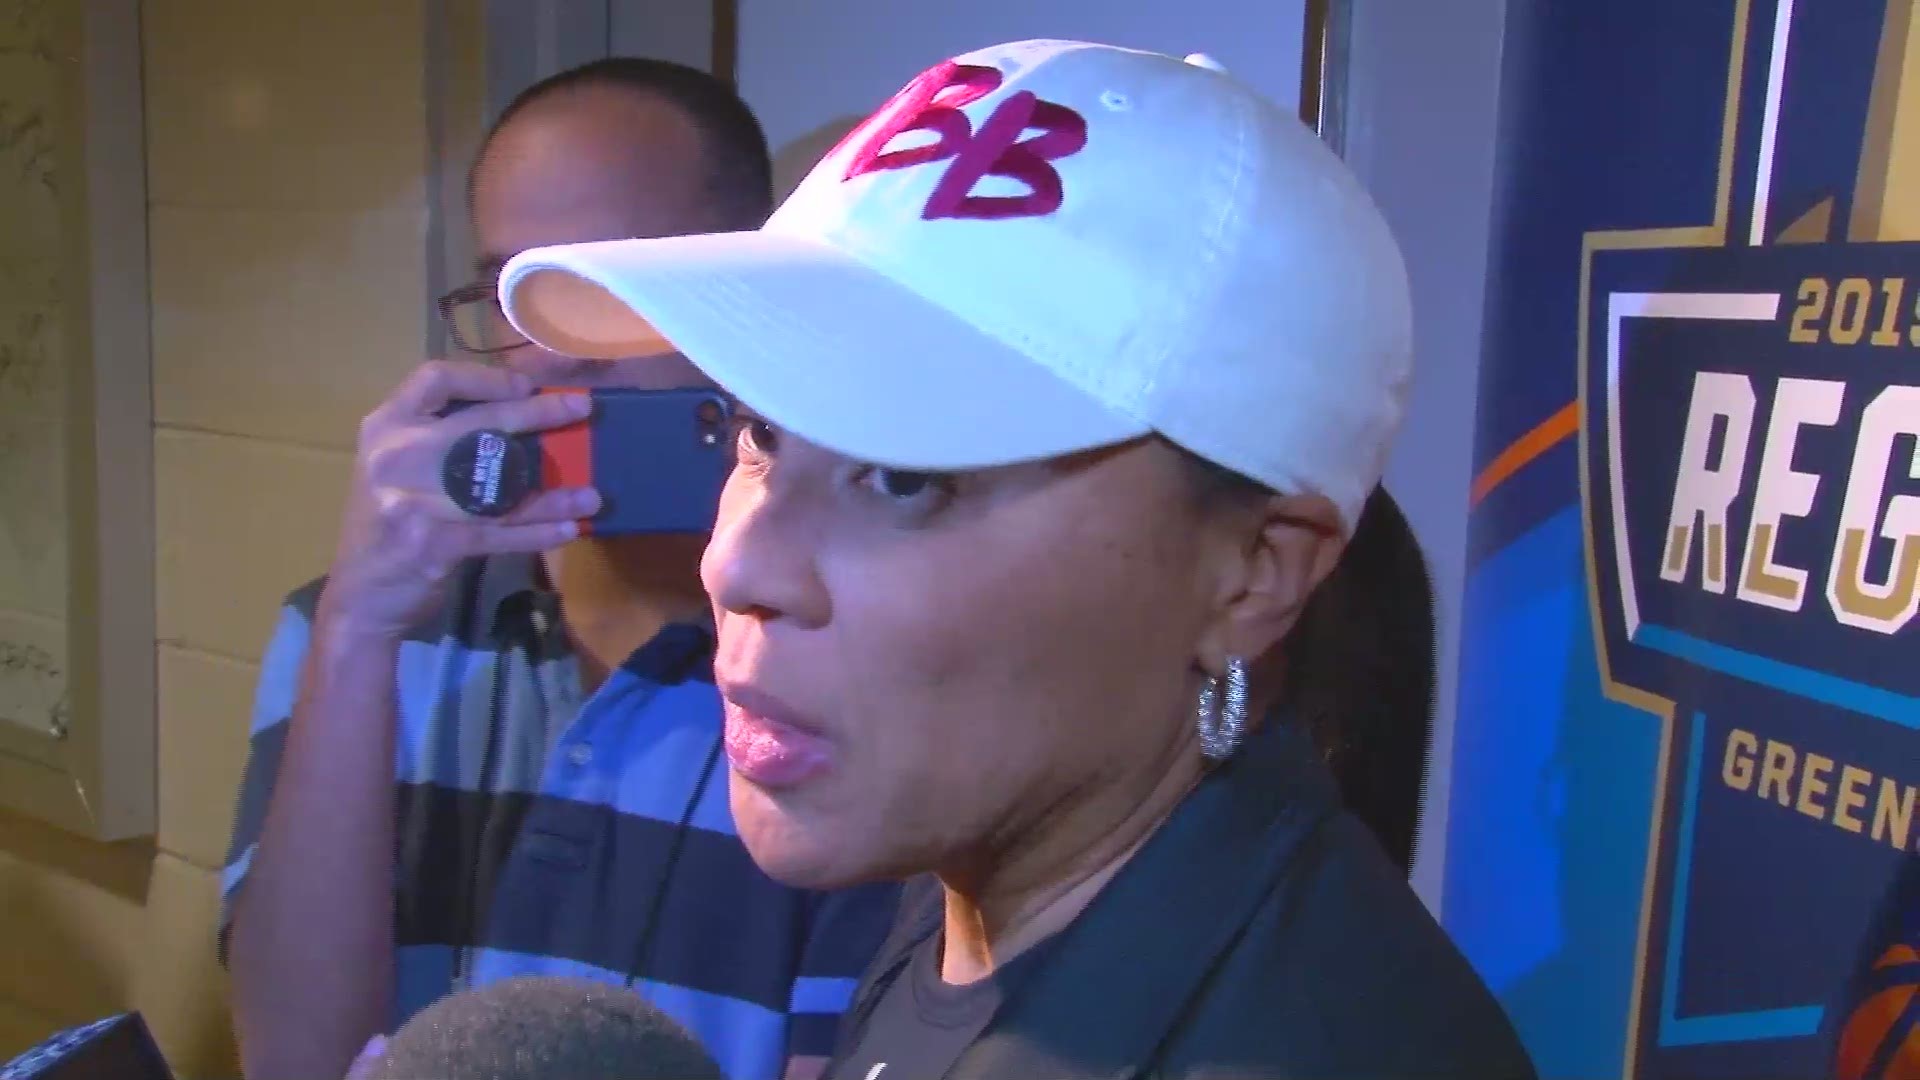 USC women's basketball head coach Dawn Staley talks about her team overcoming a lot of obstacles to get to the Sweet 16, what it's going to take to defeat Baylor and how different USC is now as opposed to their first meeting.